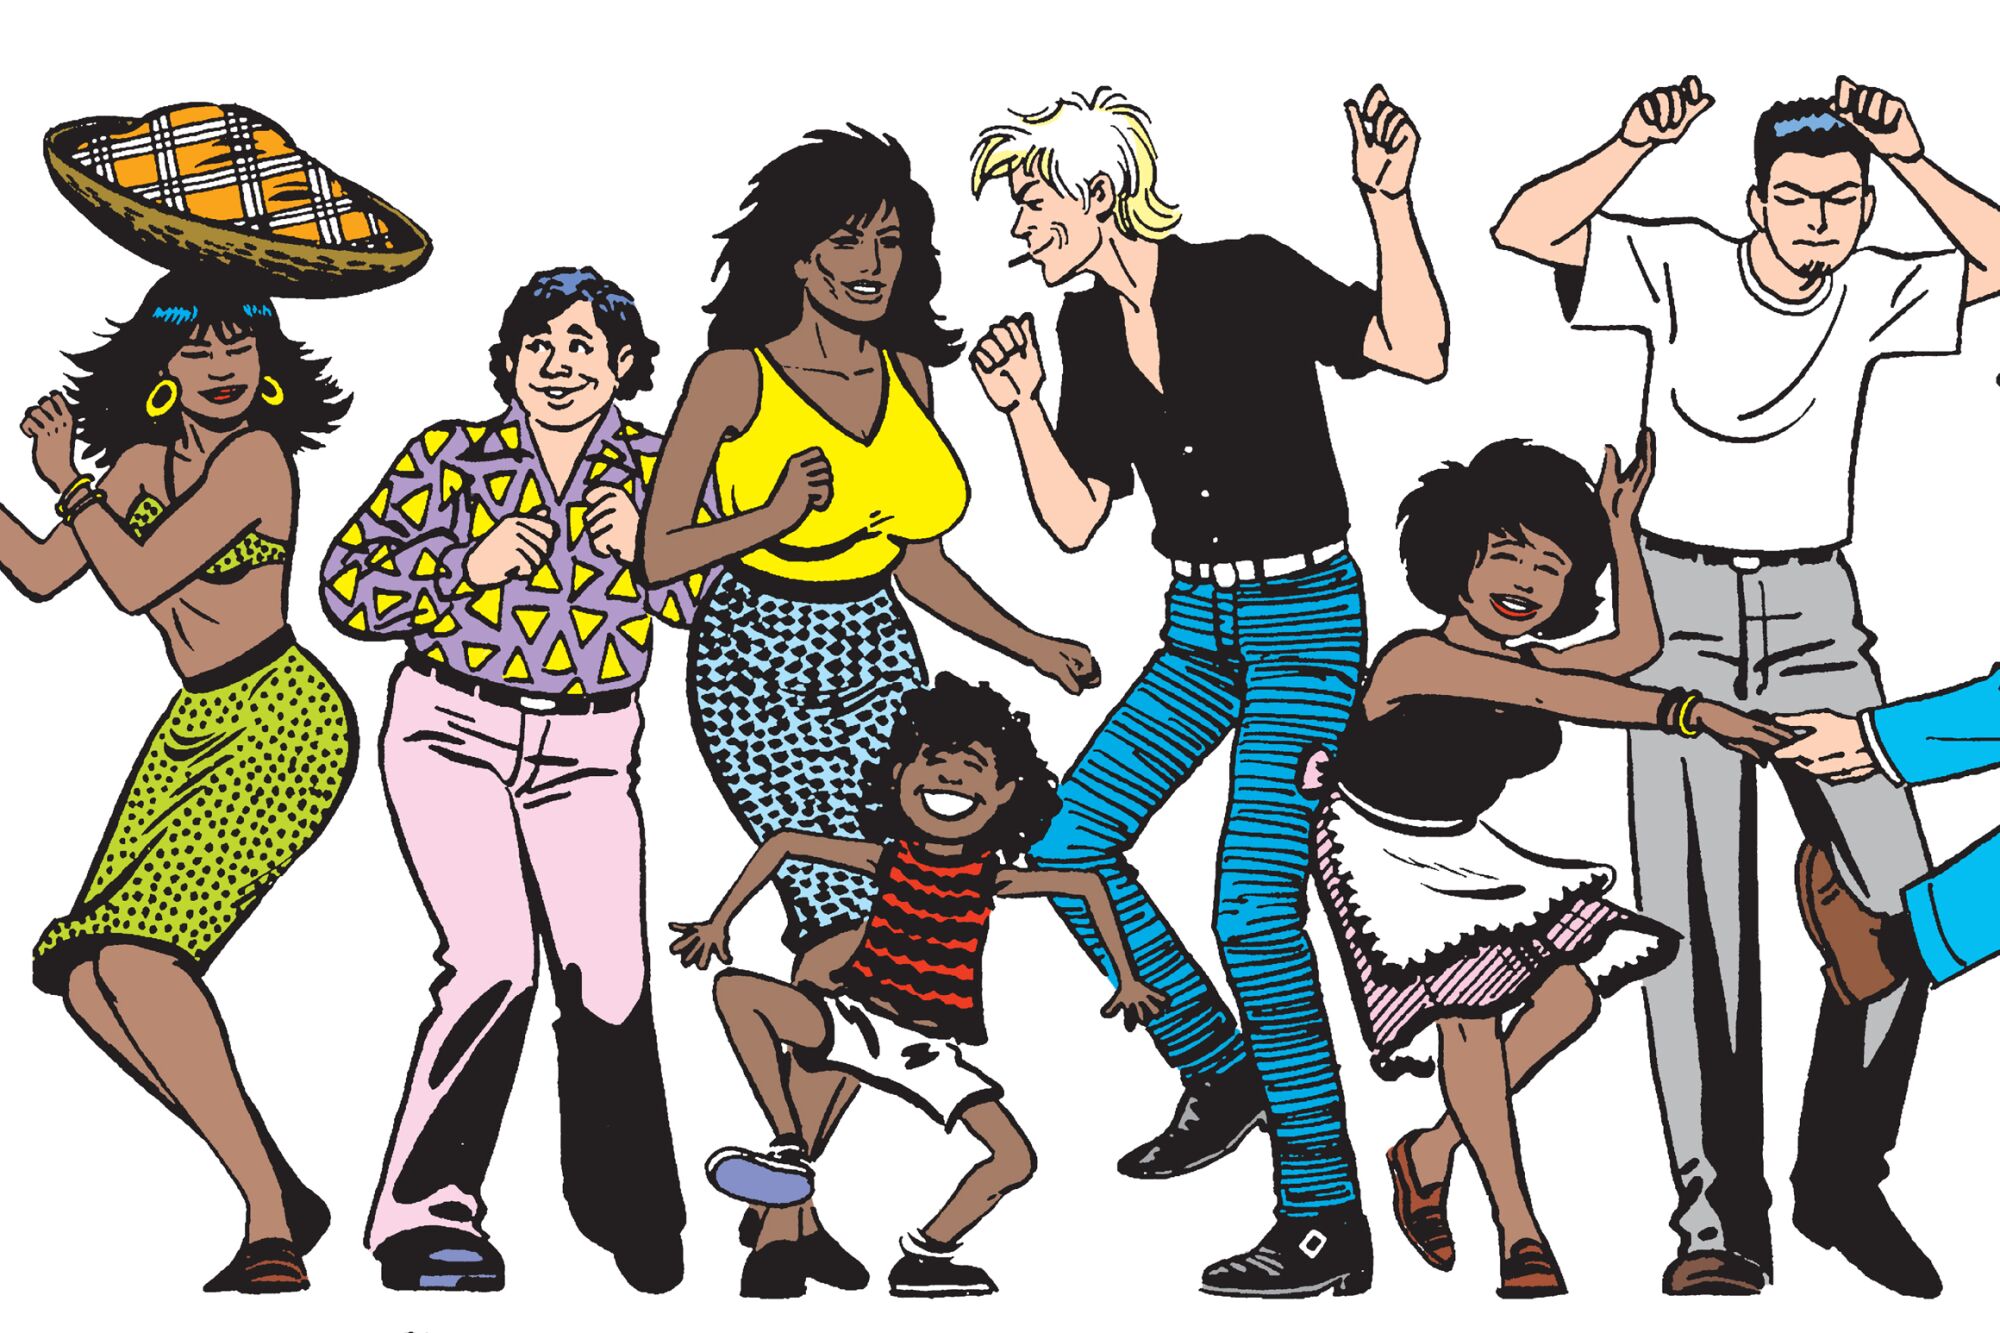 A full-color comics cover shows two rows of dancing figures — characters created by Los Bros Hernandez